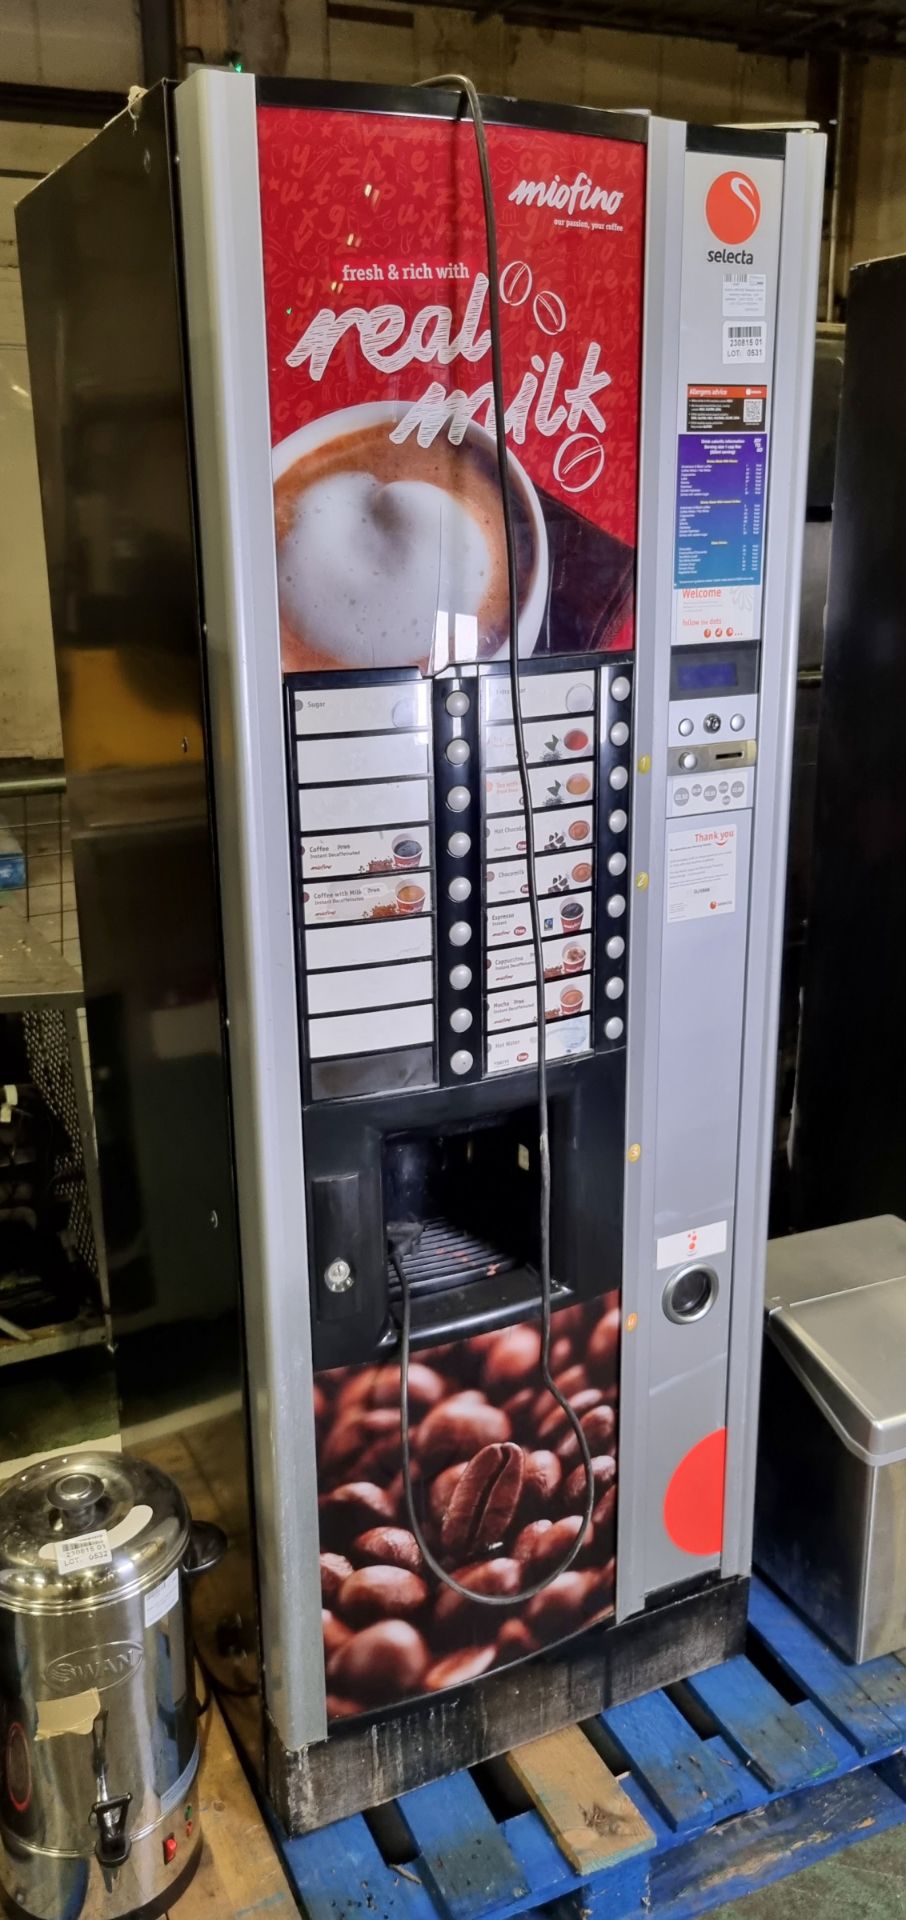 Miofino 960406 Selecta drinks vending machine - coin operated - 240V 50Hz - L 650 x W 730 x H 1830mm - Image 2 of 5